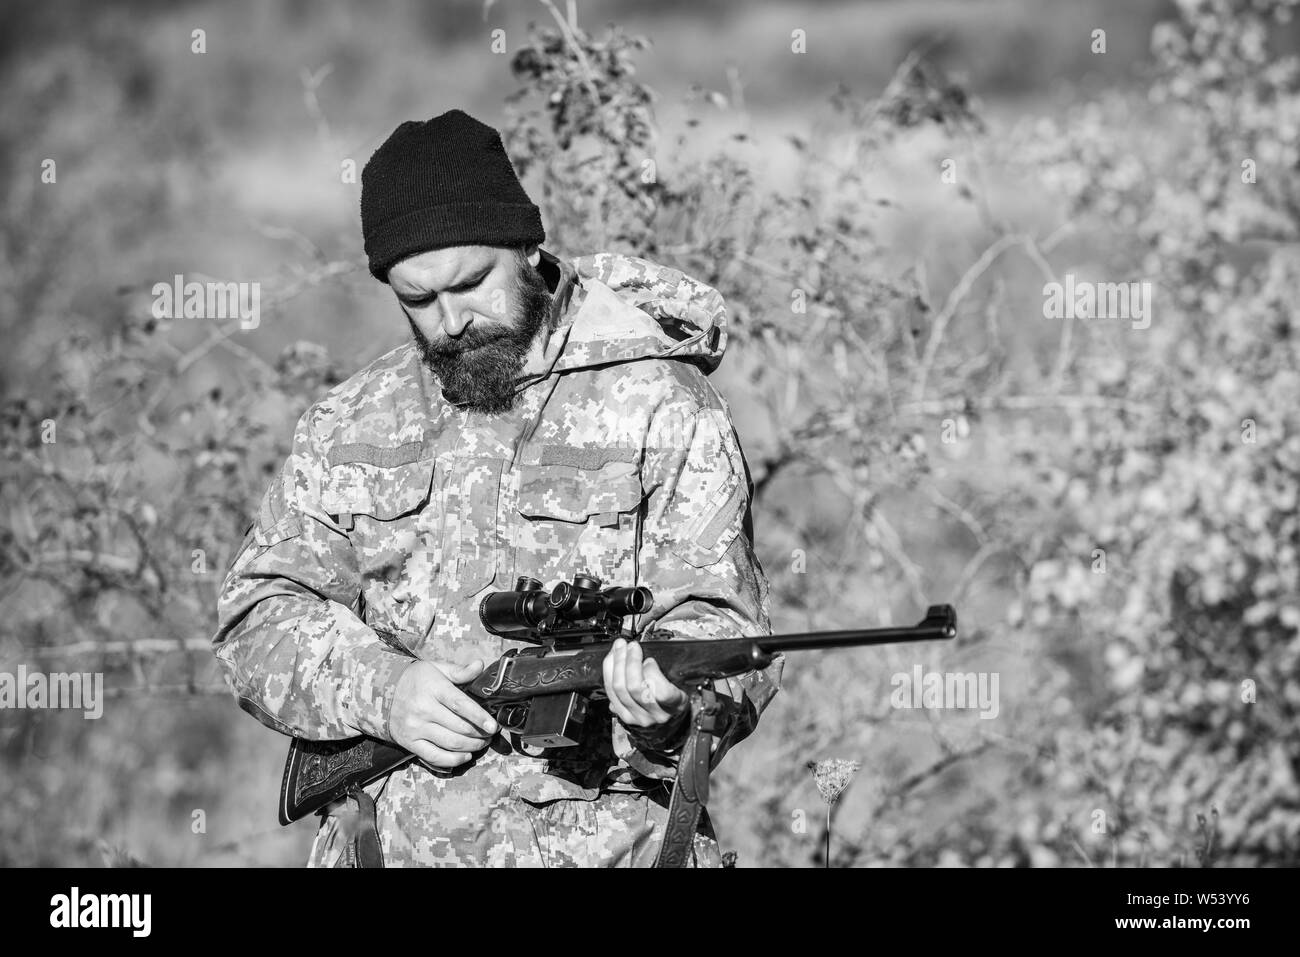 Bearded man hunter. Military uniform fashion. Army forces. Camouflage. Hunting skills and weapon equipment. How turn hunting into hobby. Man hunter with rifle gun. Boot camp. he is a business shark. Stock Photo